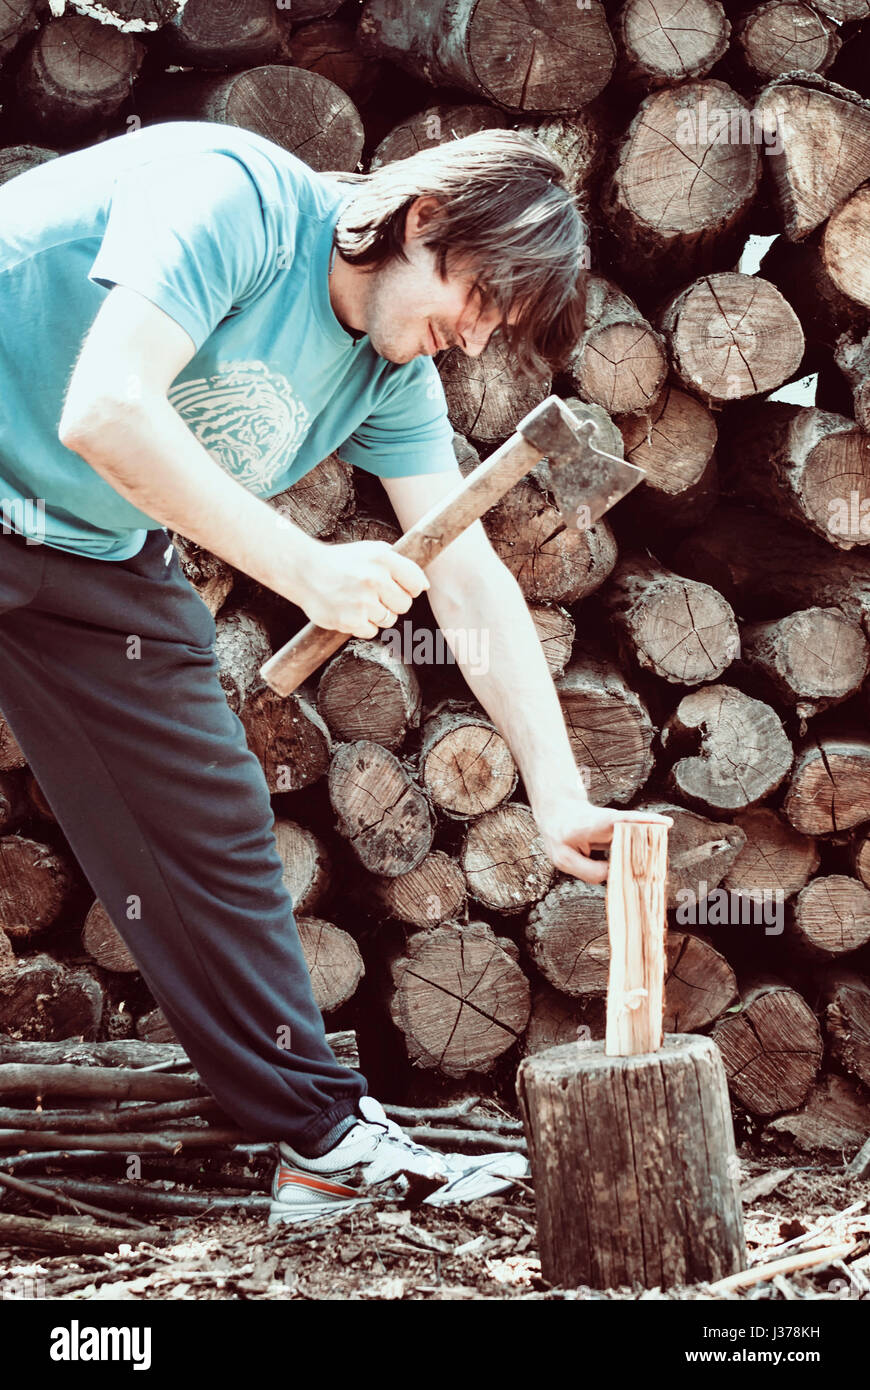 Man choping woods in the yard Stock Photo